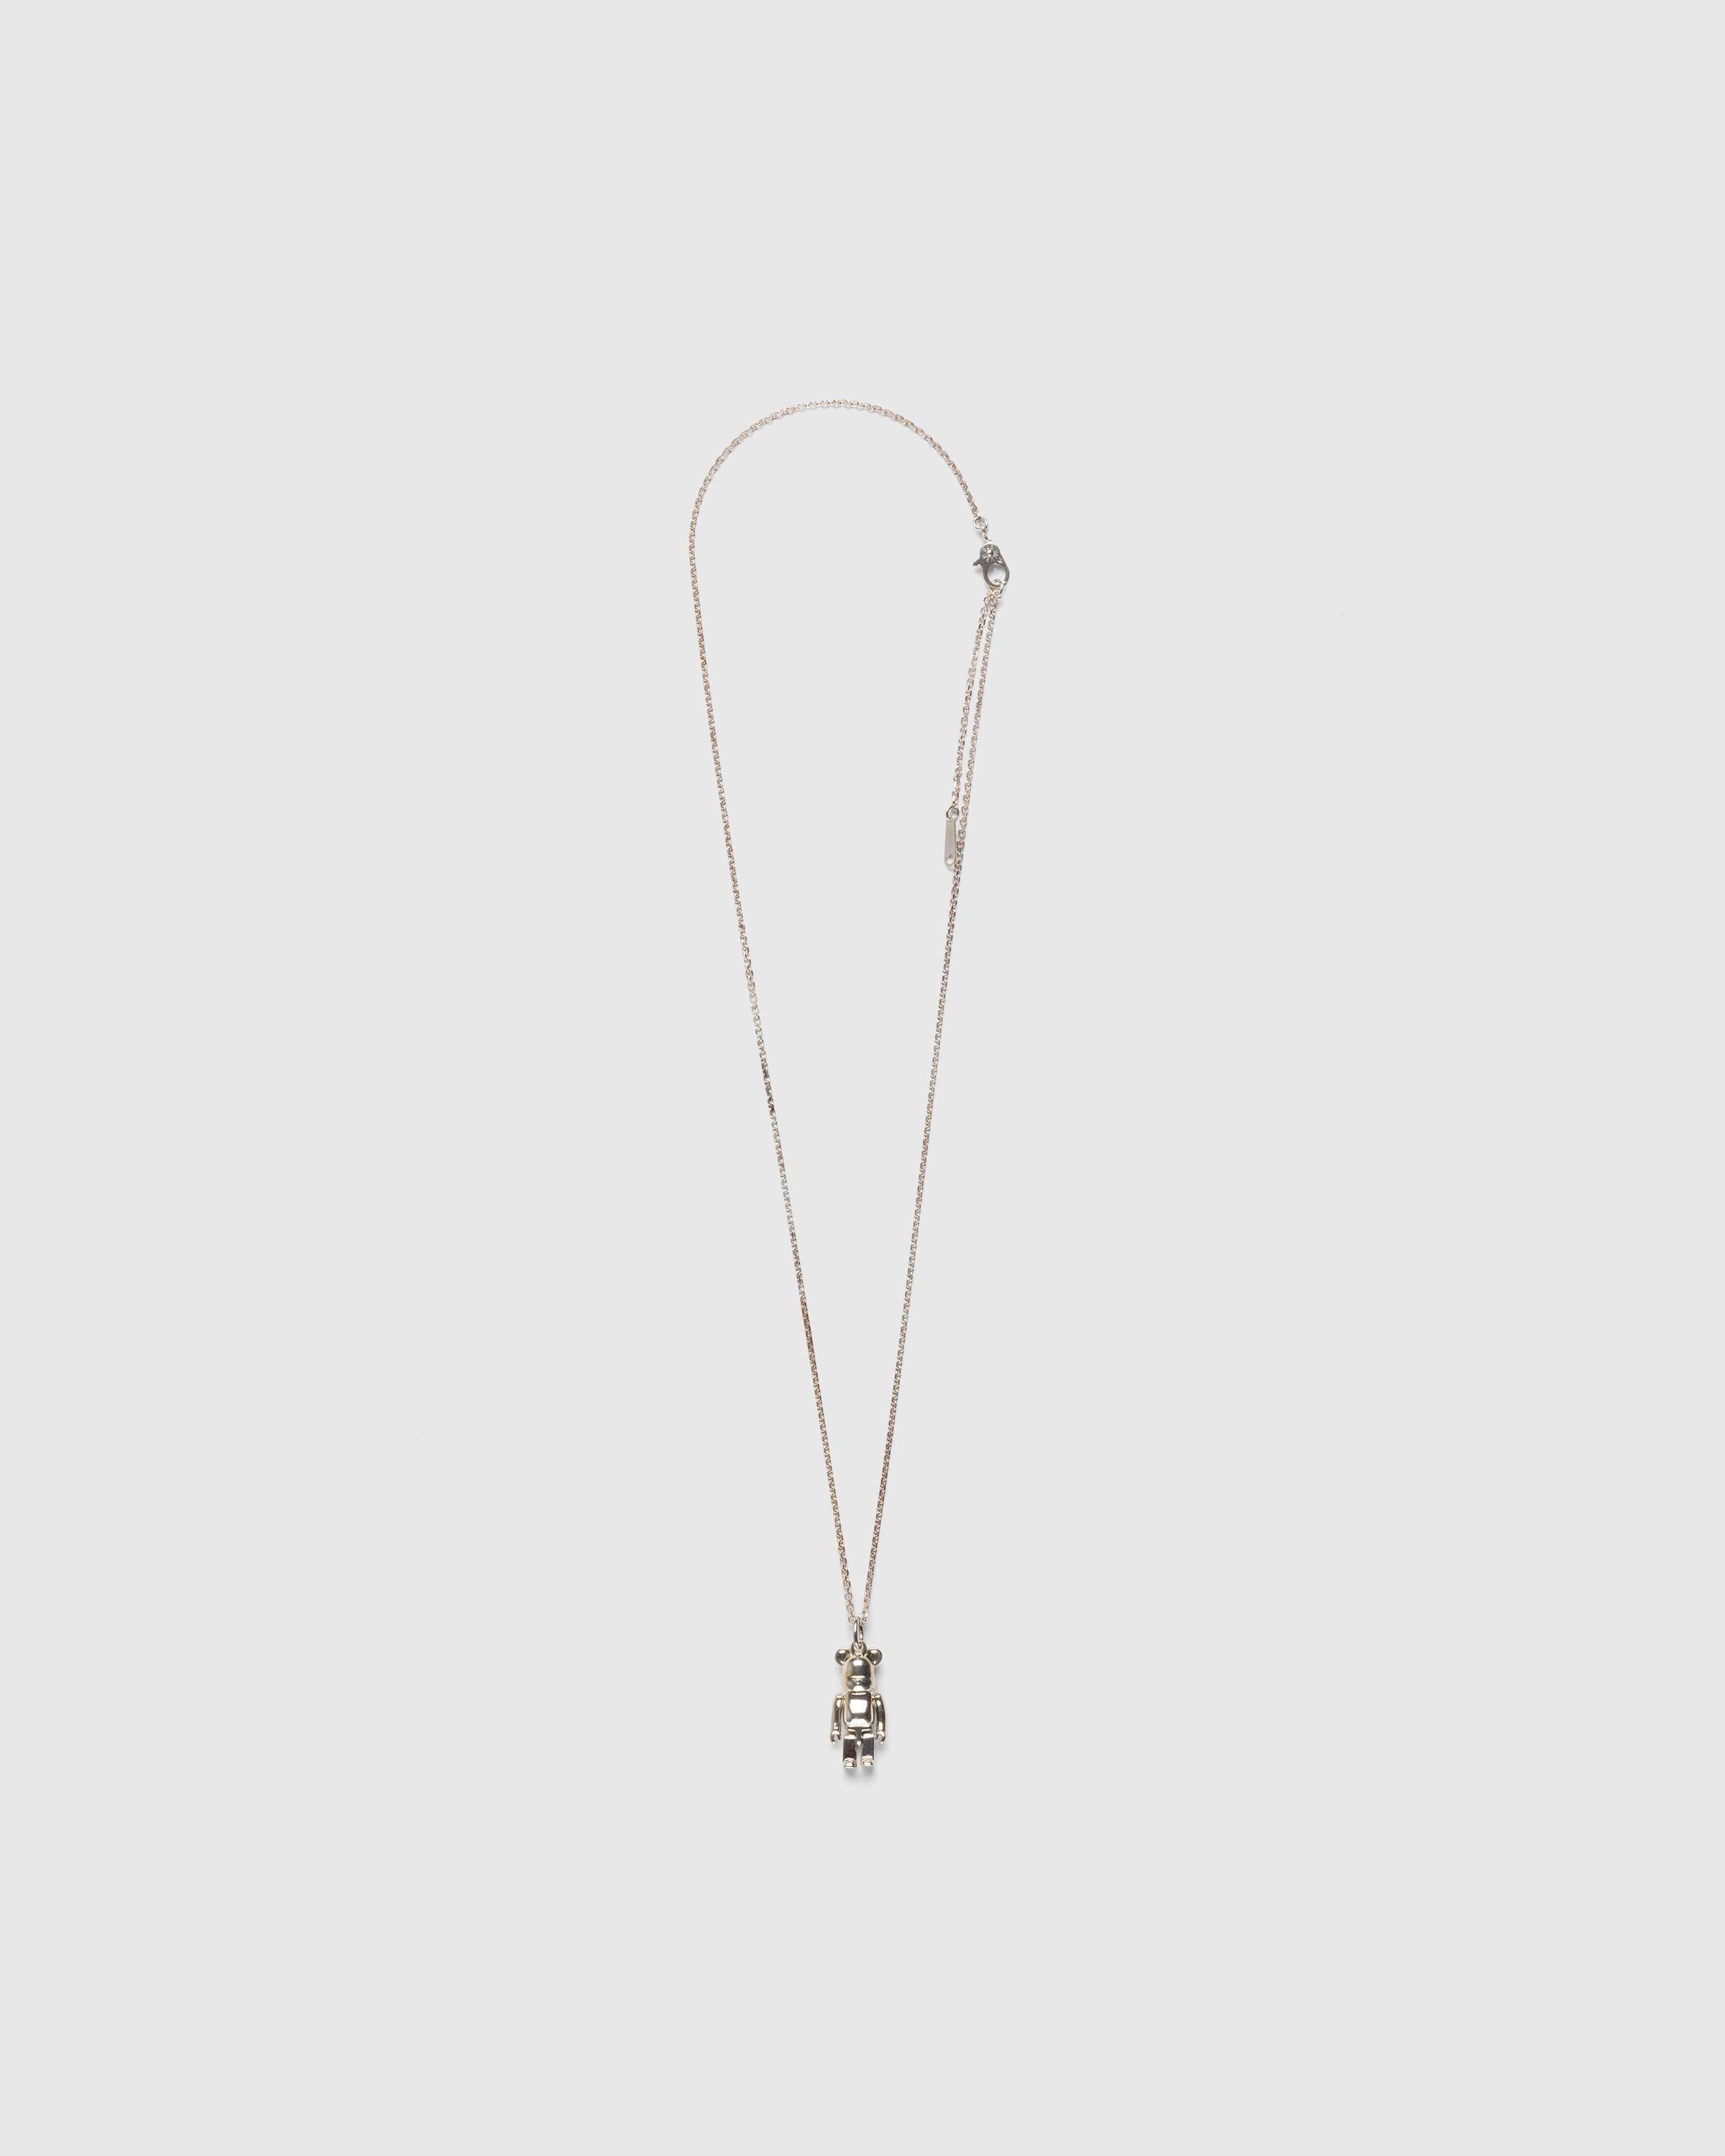 Medicom – Be@rbrick x IVXLCDM Charm Necklace Silver - Jewelry - Silver - Image 1